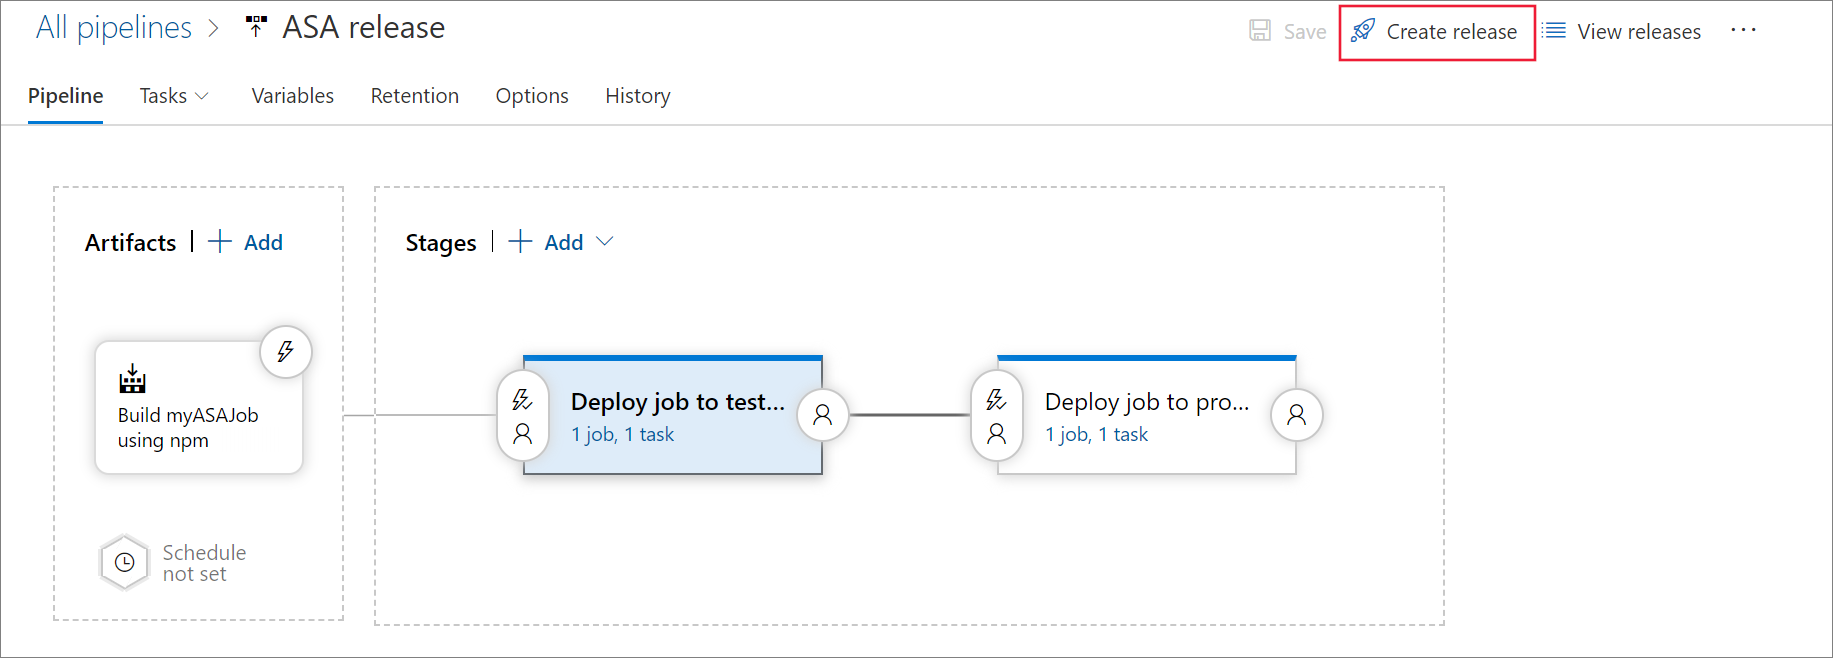 Create a release using Azure Pipelines